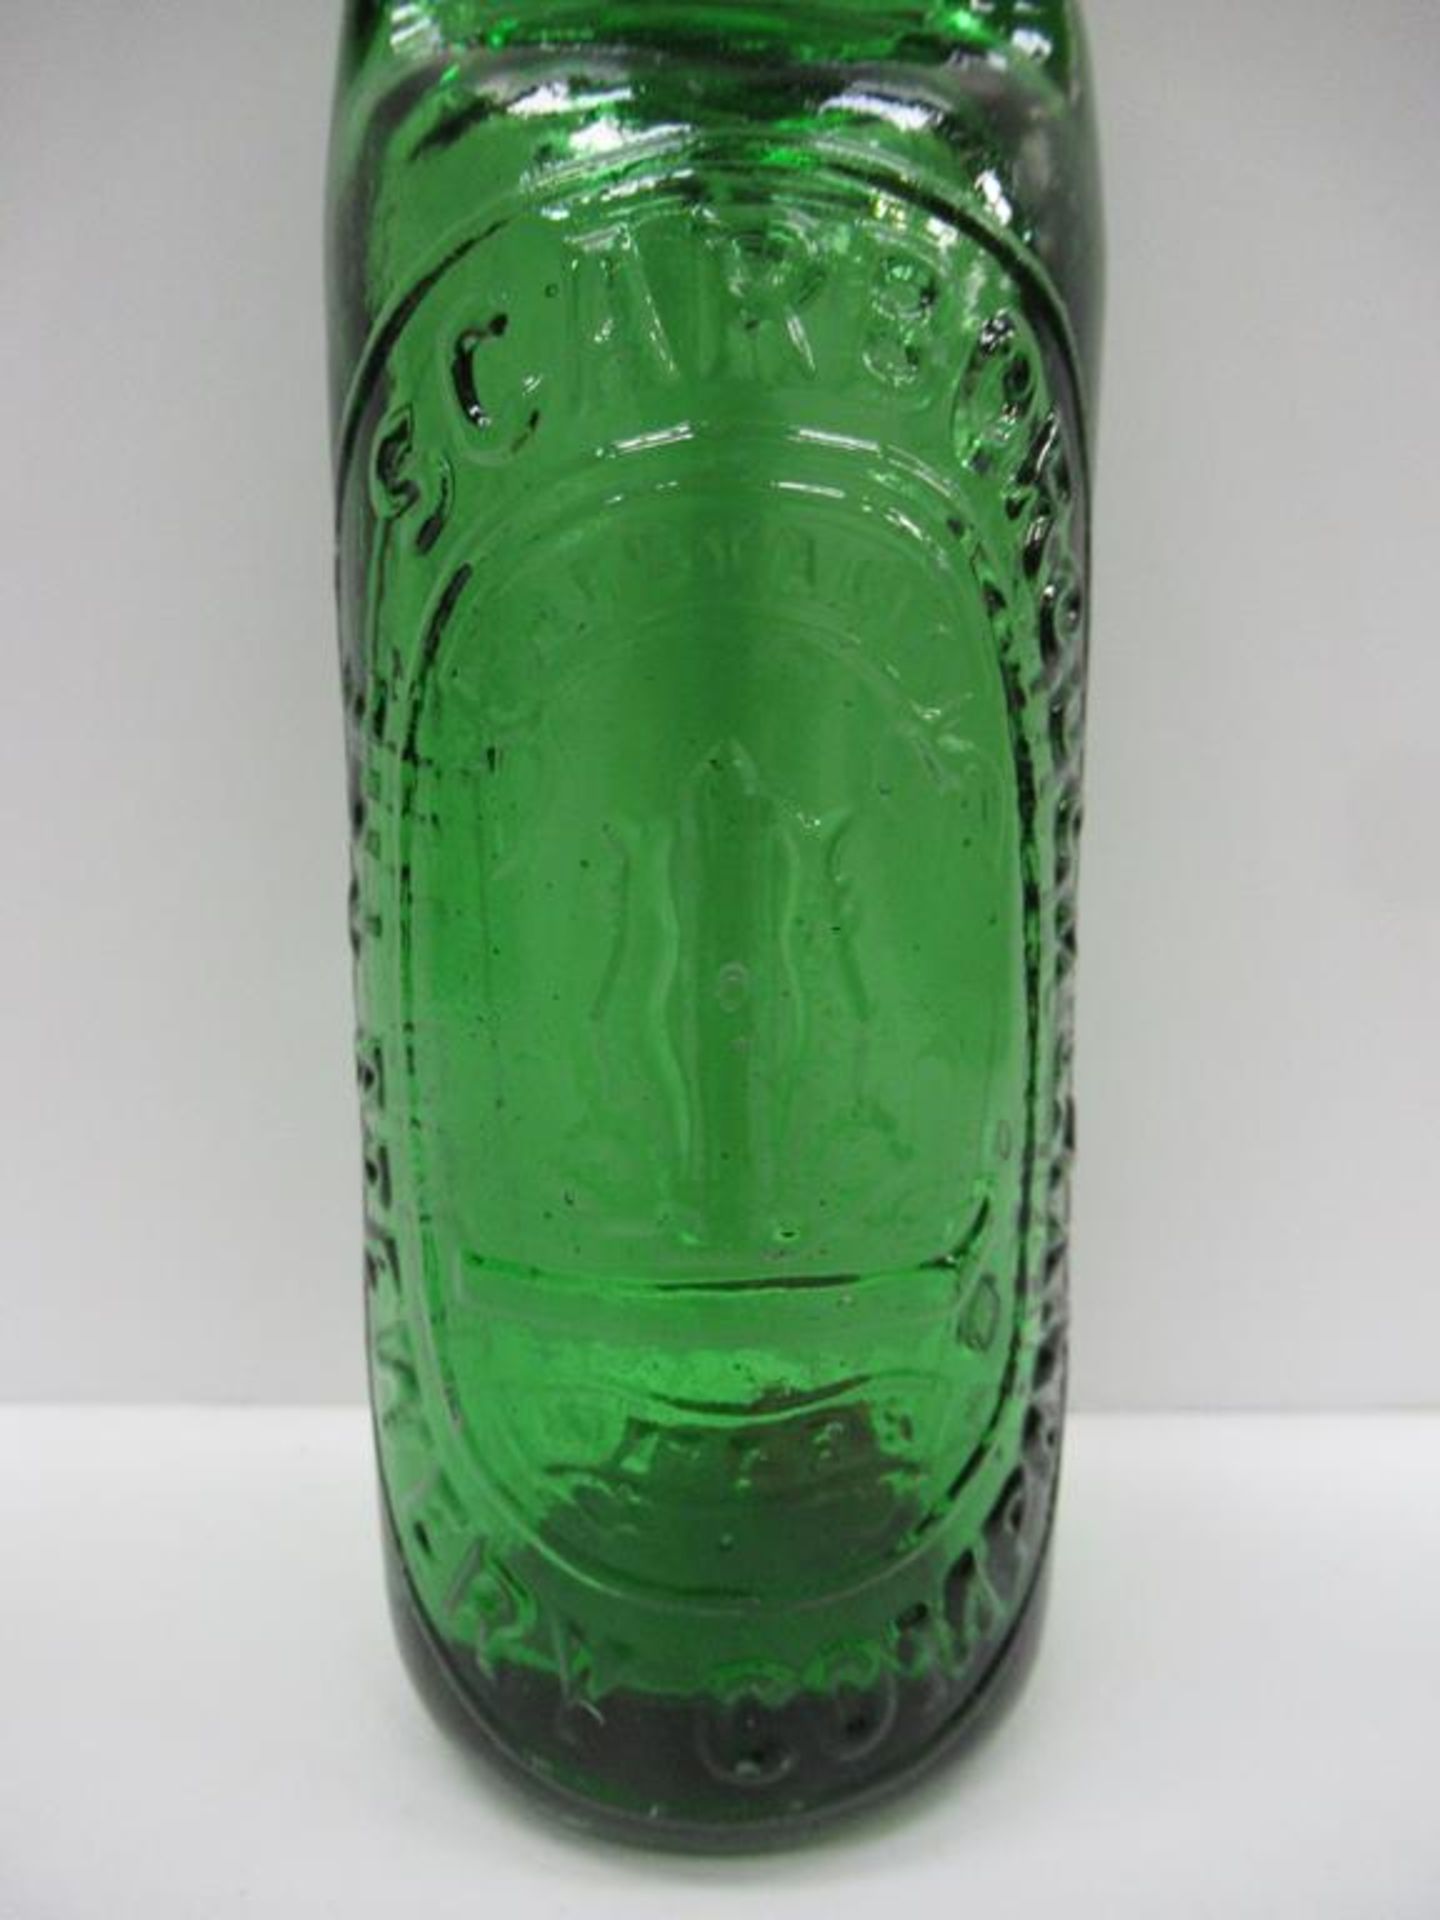 The Scarborough Brewery Co. Ltd coloured codd bottle 10oz - Image 5 of 6